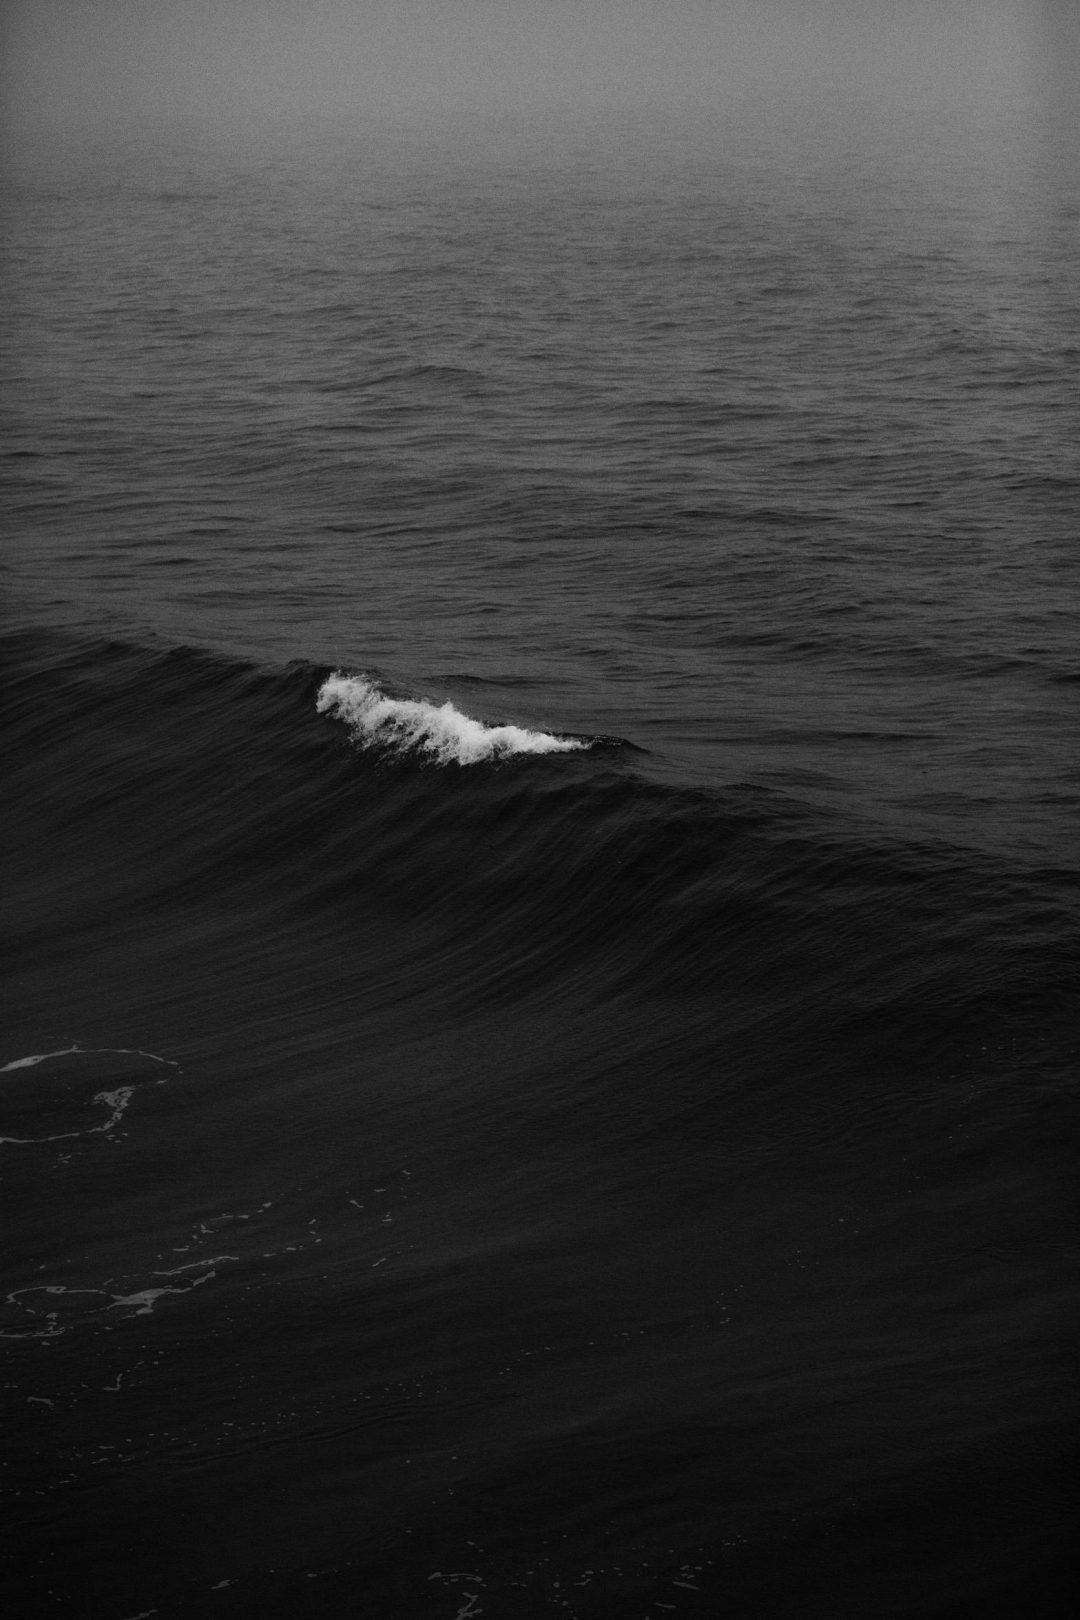 A black and white photo of a small wave in the ocean - Dark phone, dark